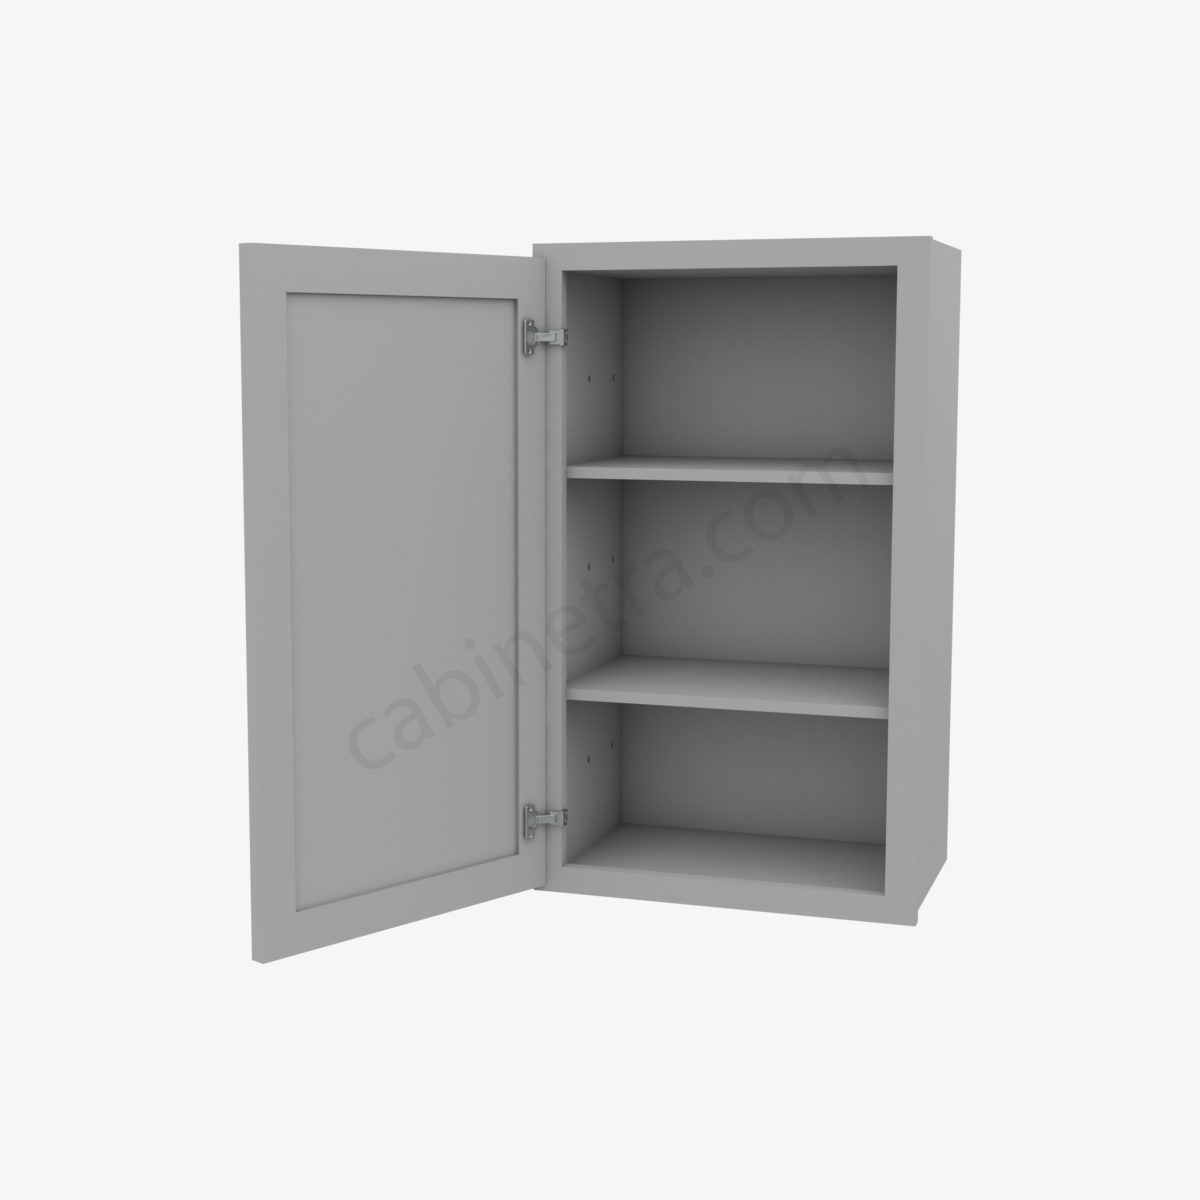 AB W1830 5 Forevermark Lait Gray Shaker Cabinetra scaled